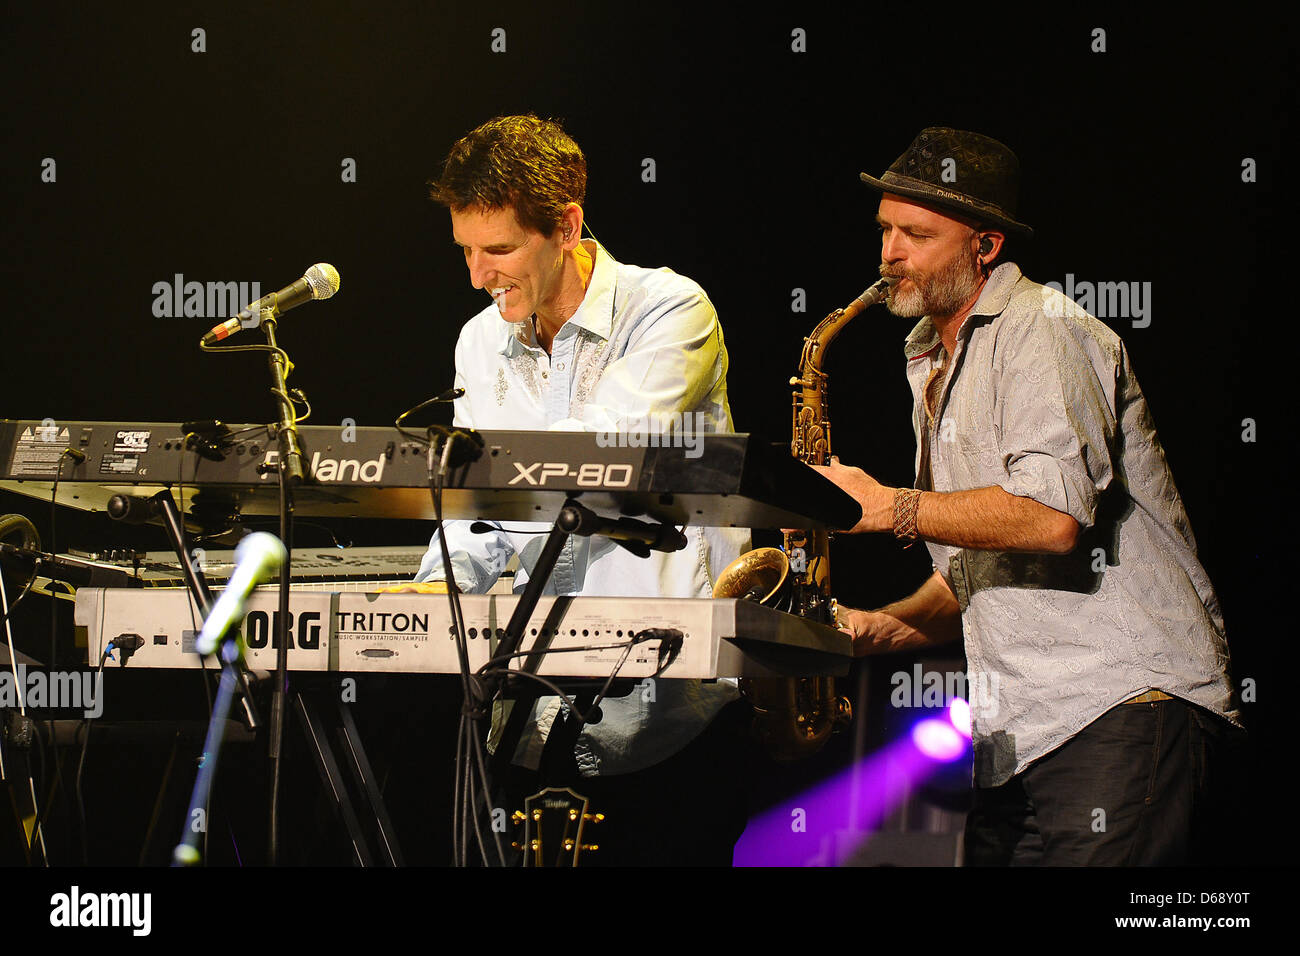 Keyboarder Tom Brooks (L) and saxophon player Todd Cooper perform during a The Alan Parsons Live Project concert at Colosseum Theater in Essen, Germany, 20 July 2012. Photo: Revierfoto Stock Photo